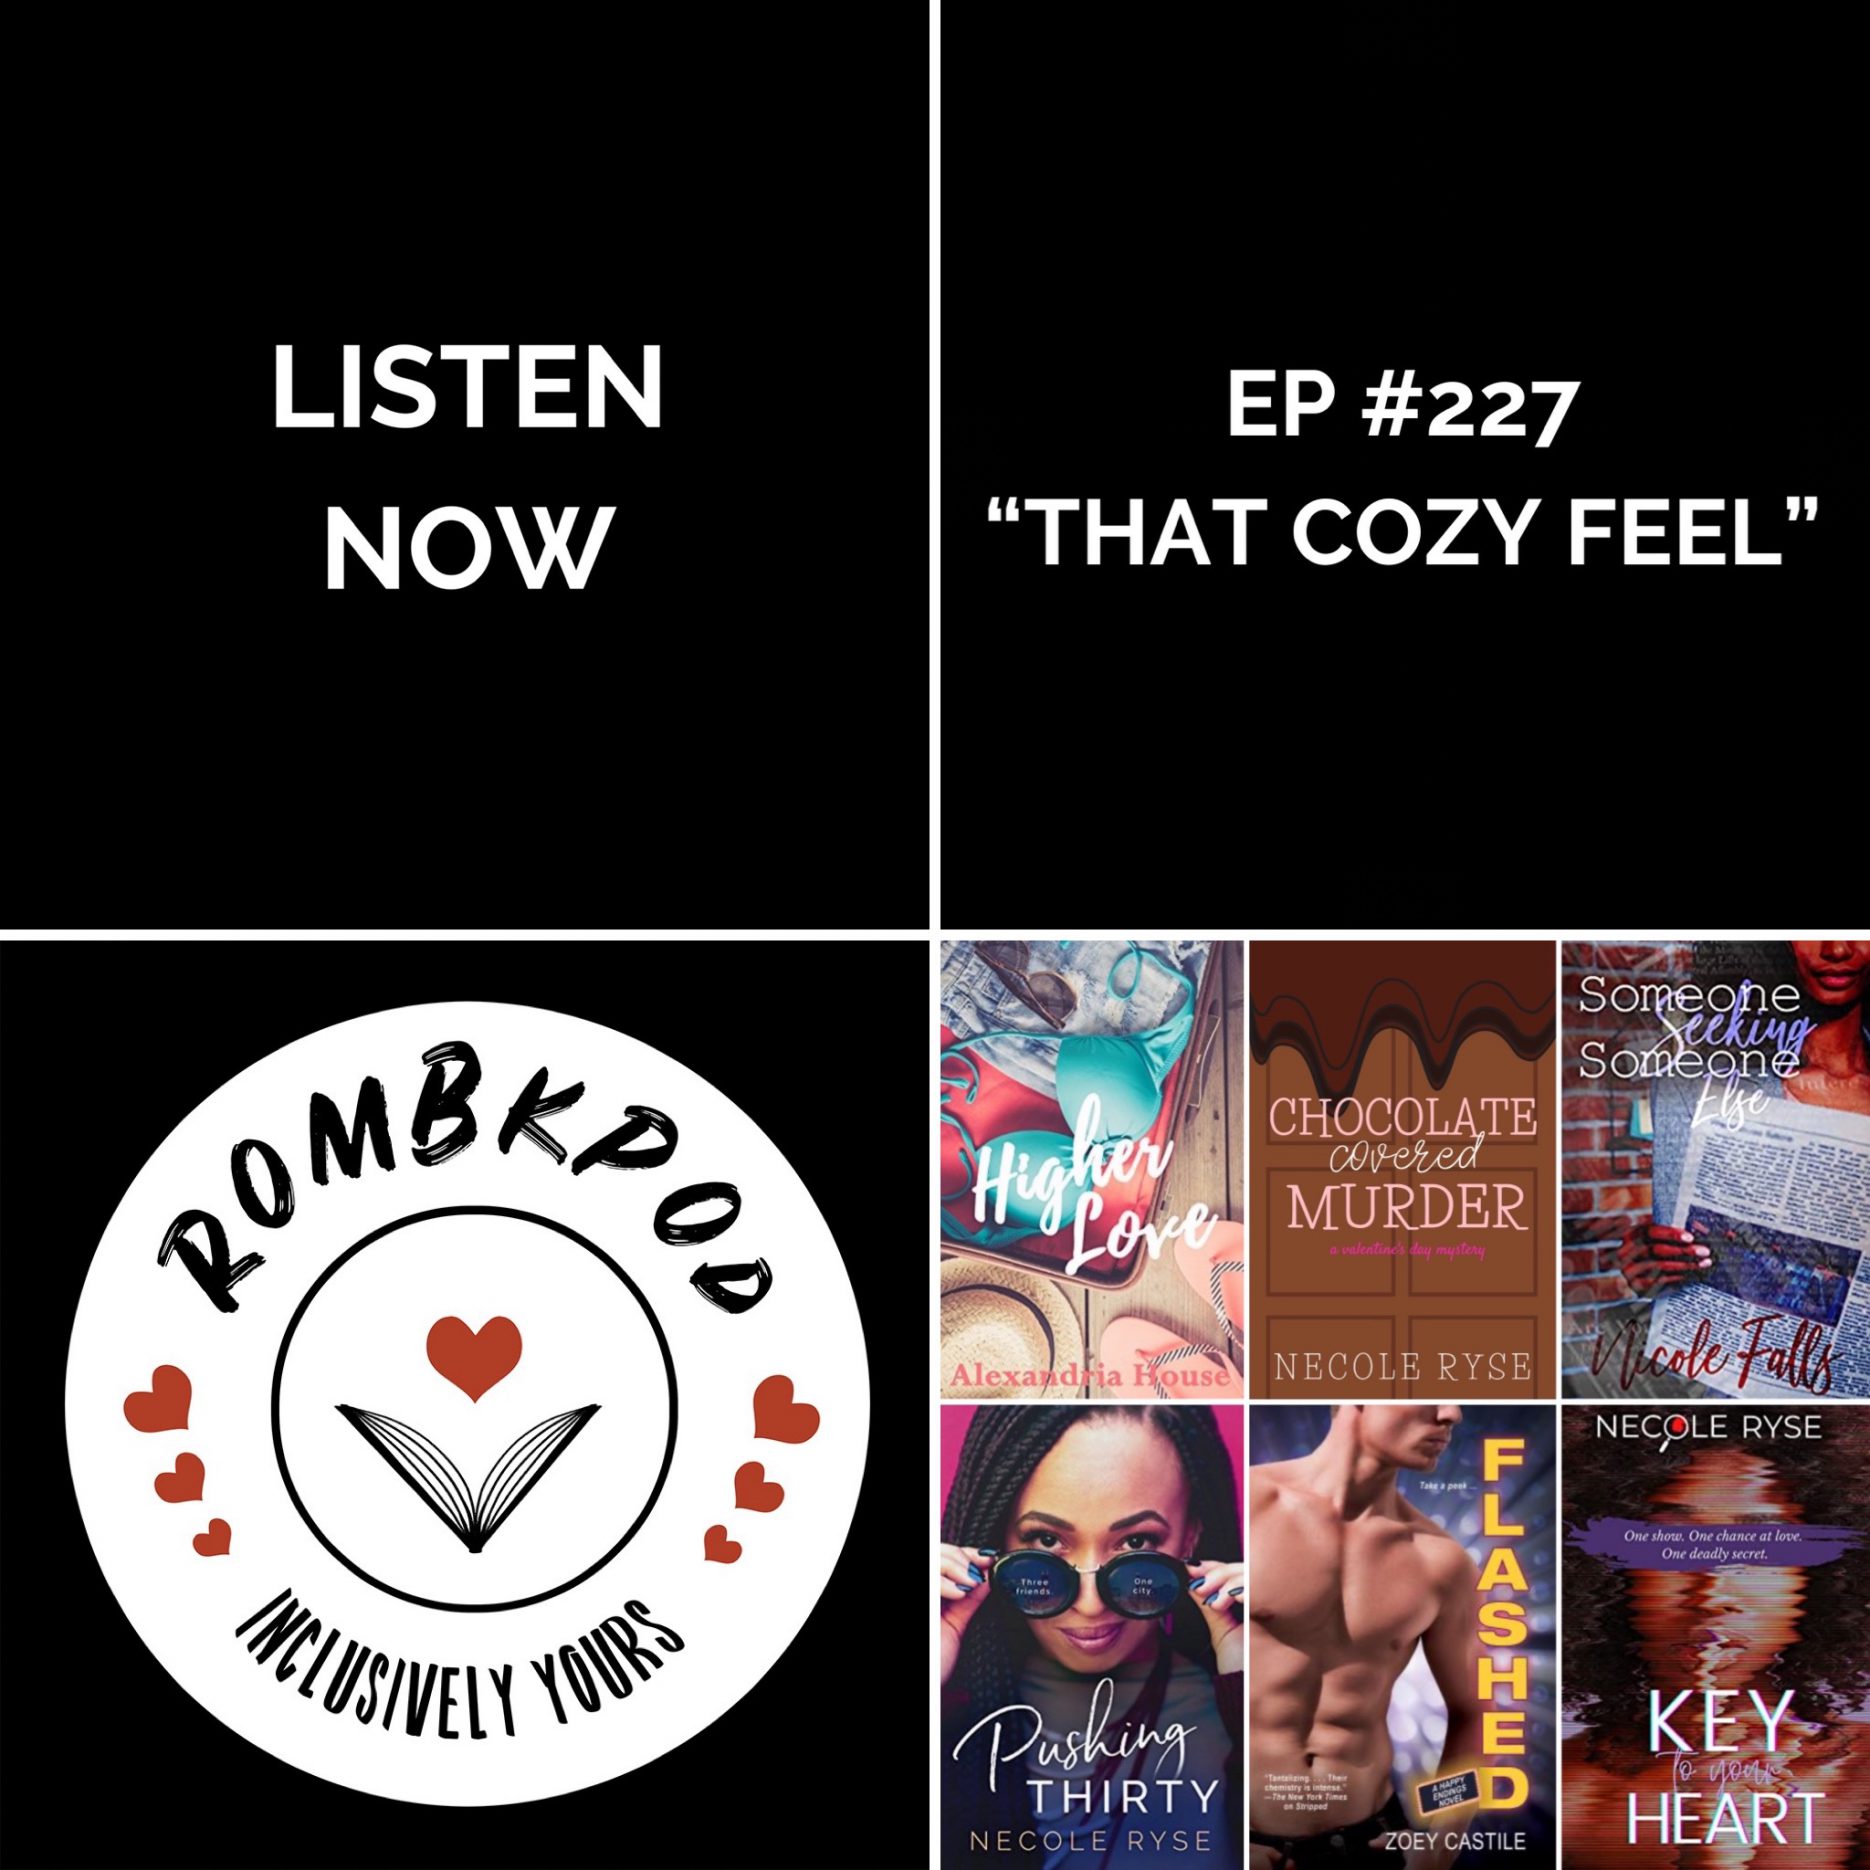 IMAGE: lower left corner, RomBkPod heart logo; lower right corner, ep #227 book cover collage; IMAGE TEXT: Listen Now, ep #227 "That Cozy Feel"